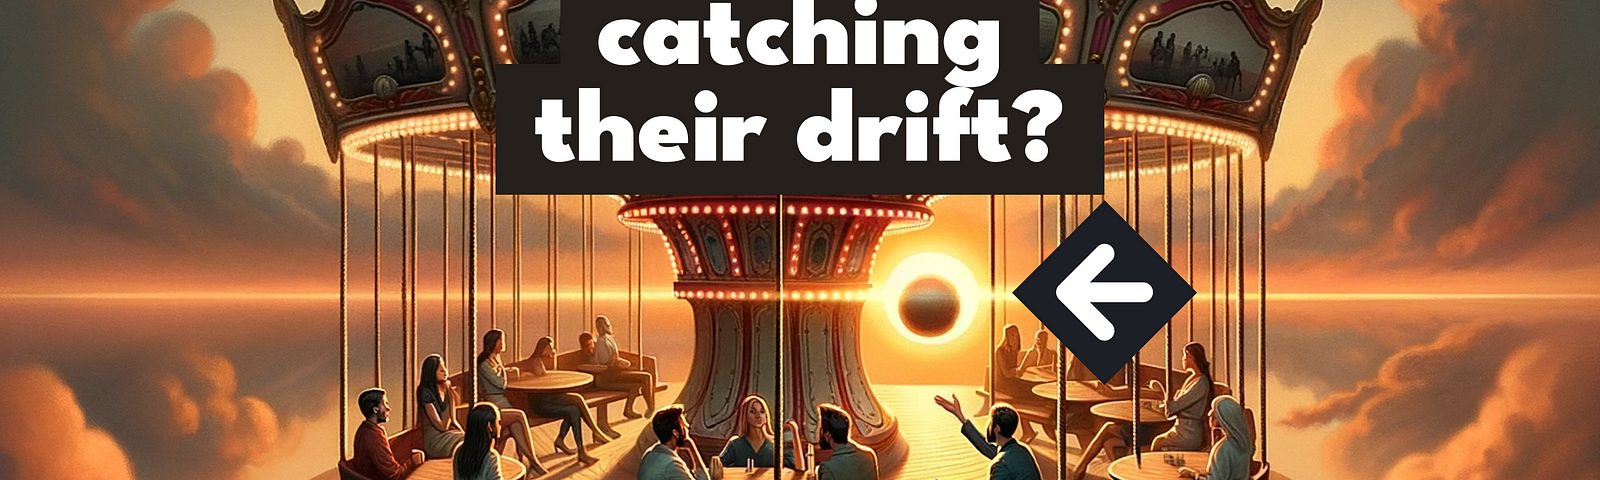 Stock photo of a vintage carousel spinning during sunset. On the carousel, people of various genders and ethnicities are engaged in profound conversations. Amidst their talk, a person throws a ball directly forward, but the ball deviates from its path, illustrating the unexpected twists in their dialogue.